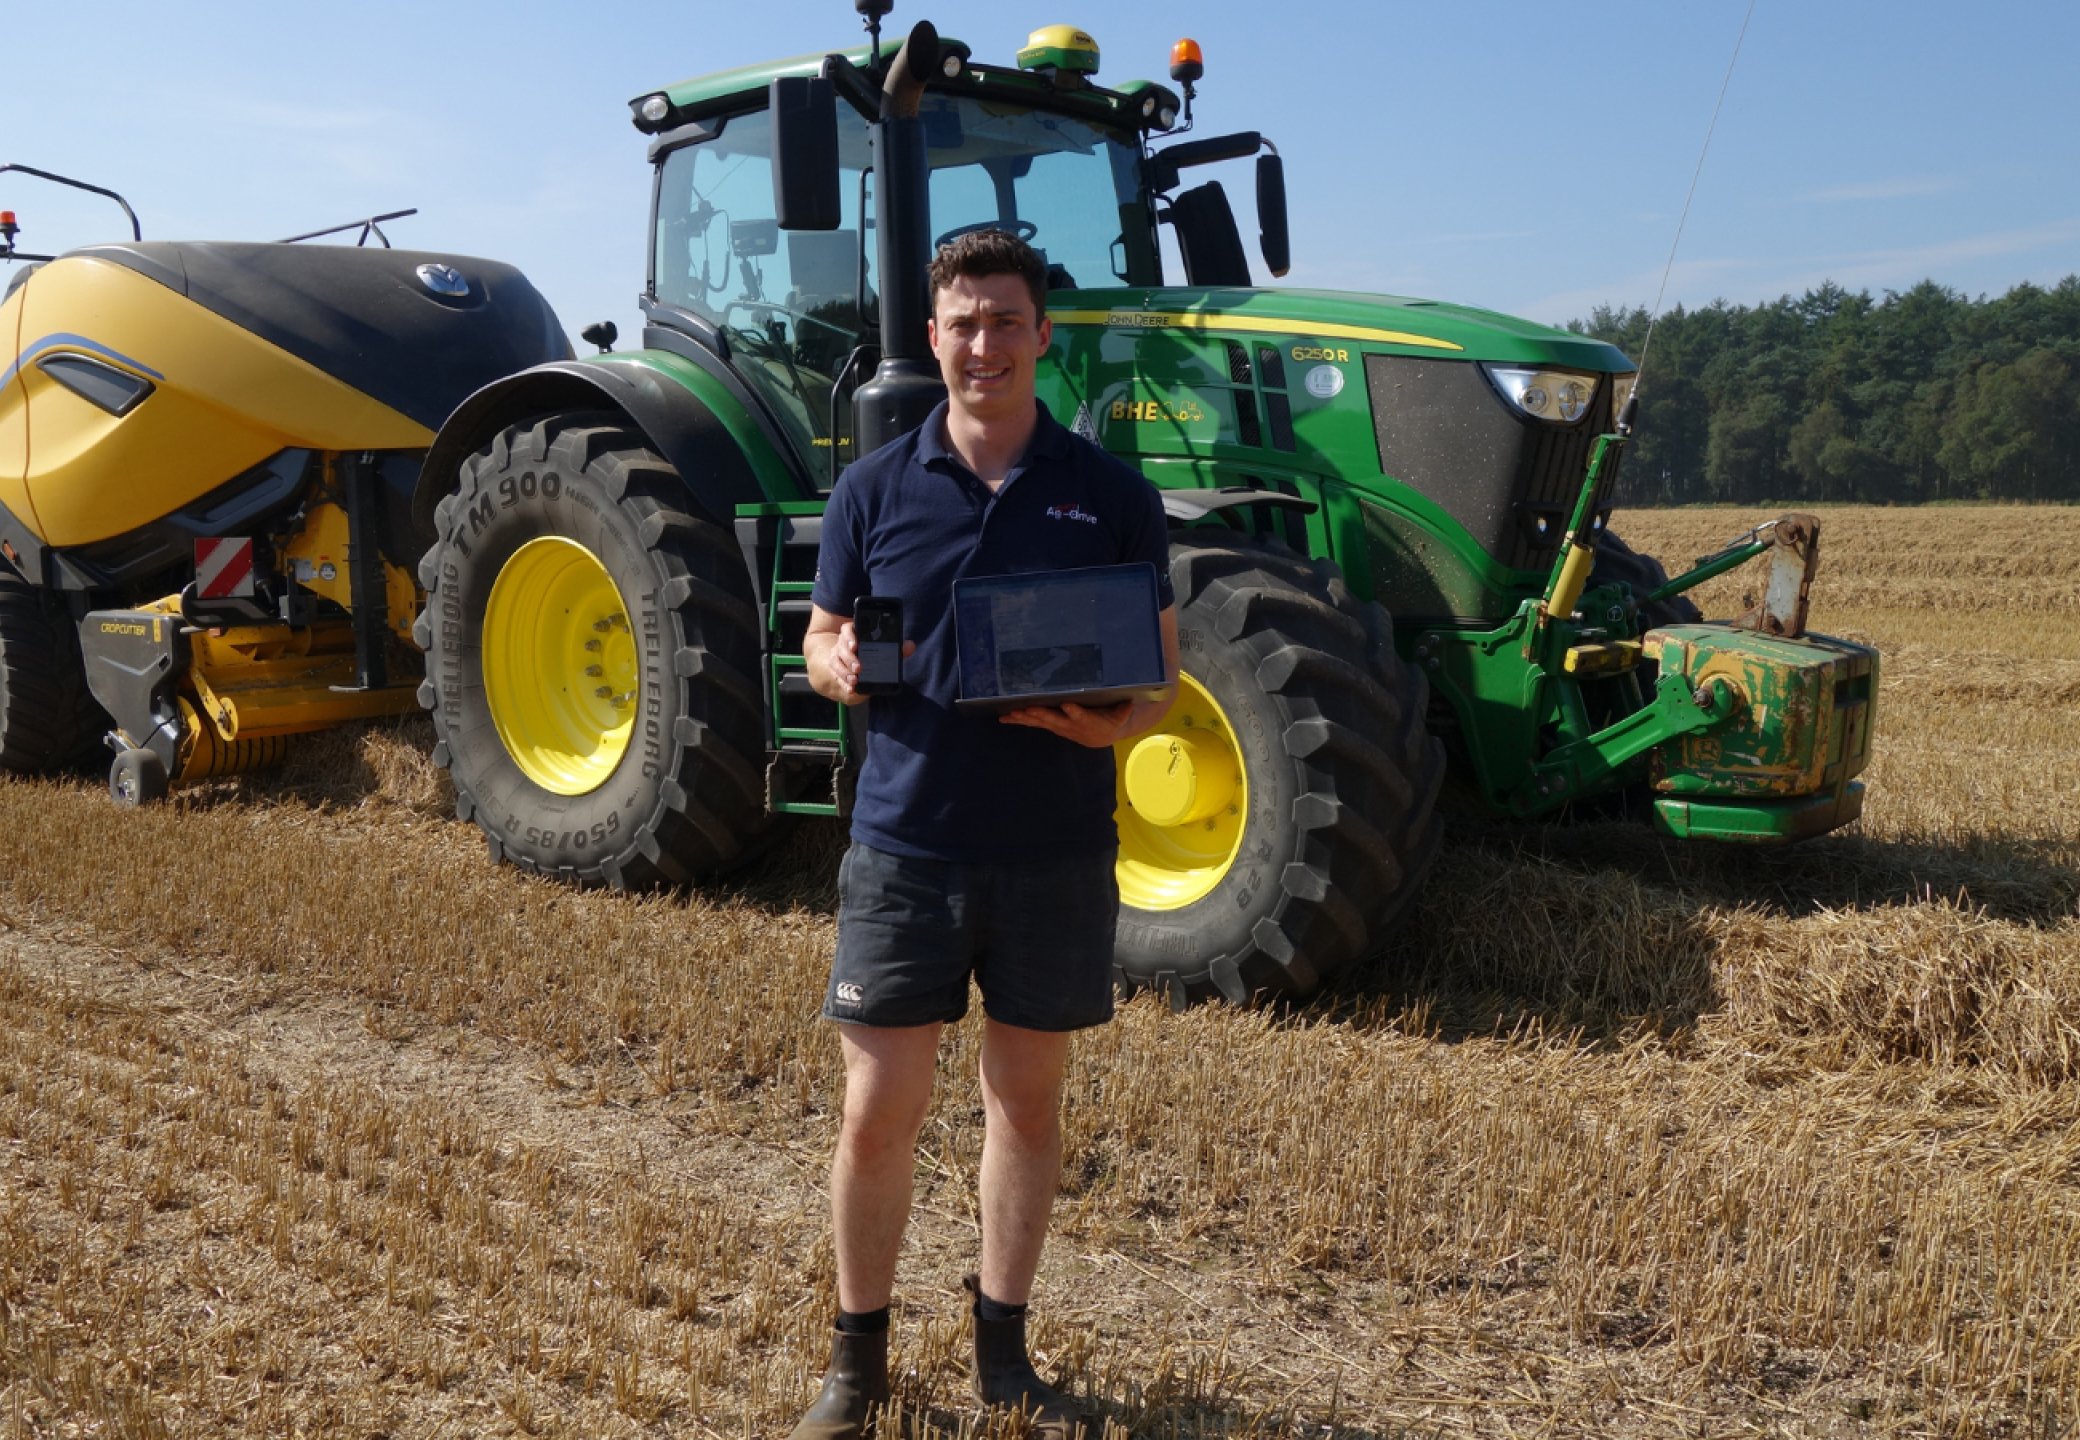 Will Dunn, founder-CEO of Ag-drive wins Agri-tech Innovator of the Year Silver award at British Farming Awards 2022